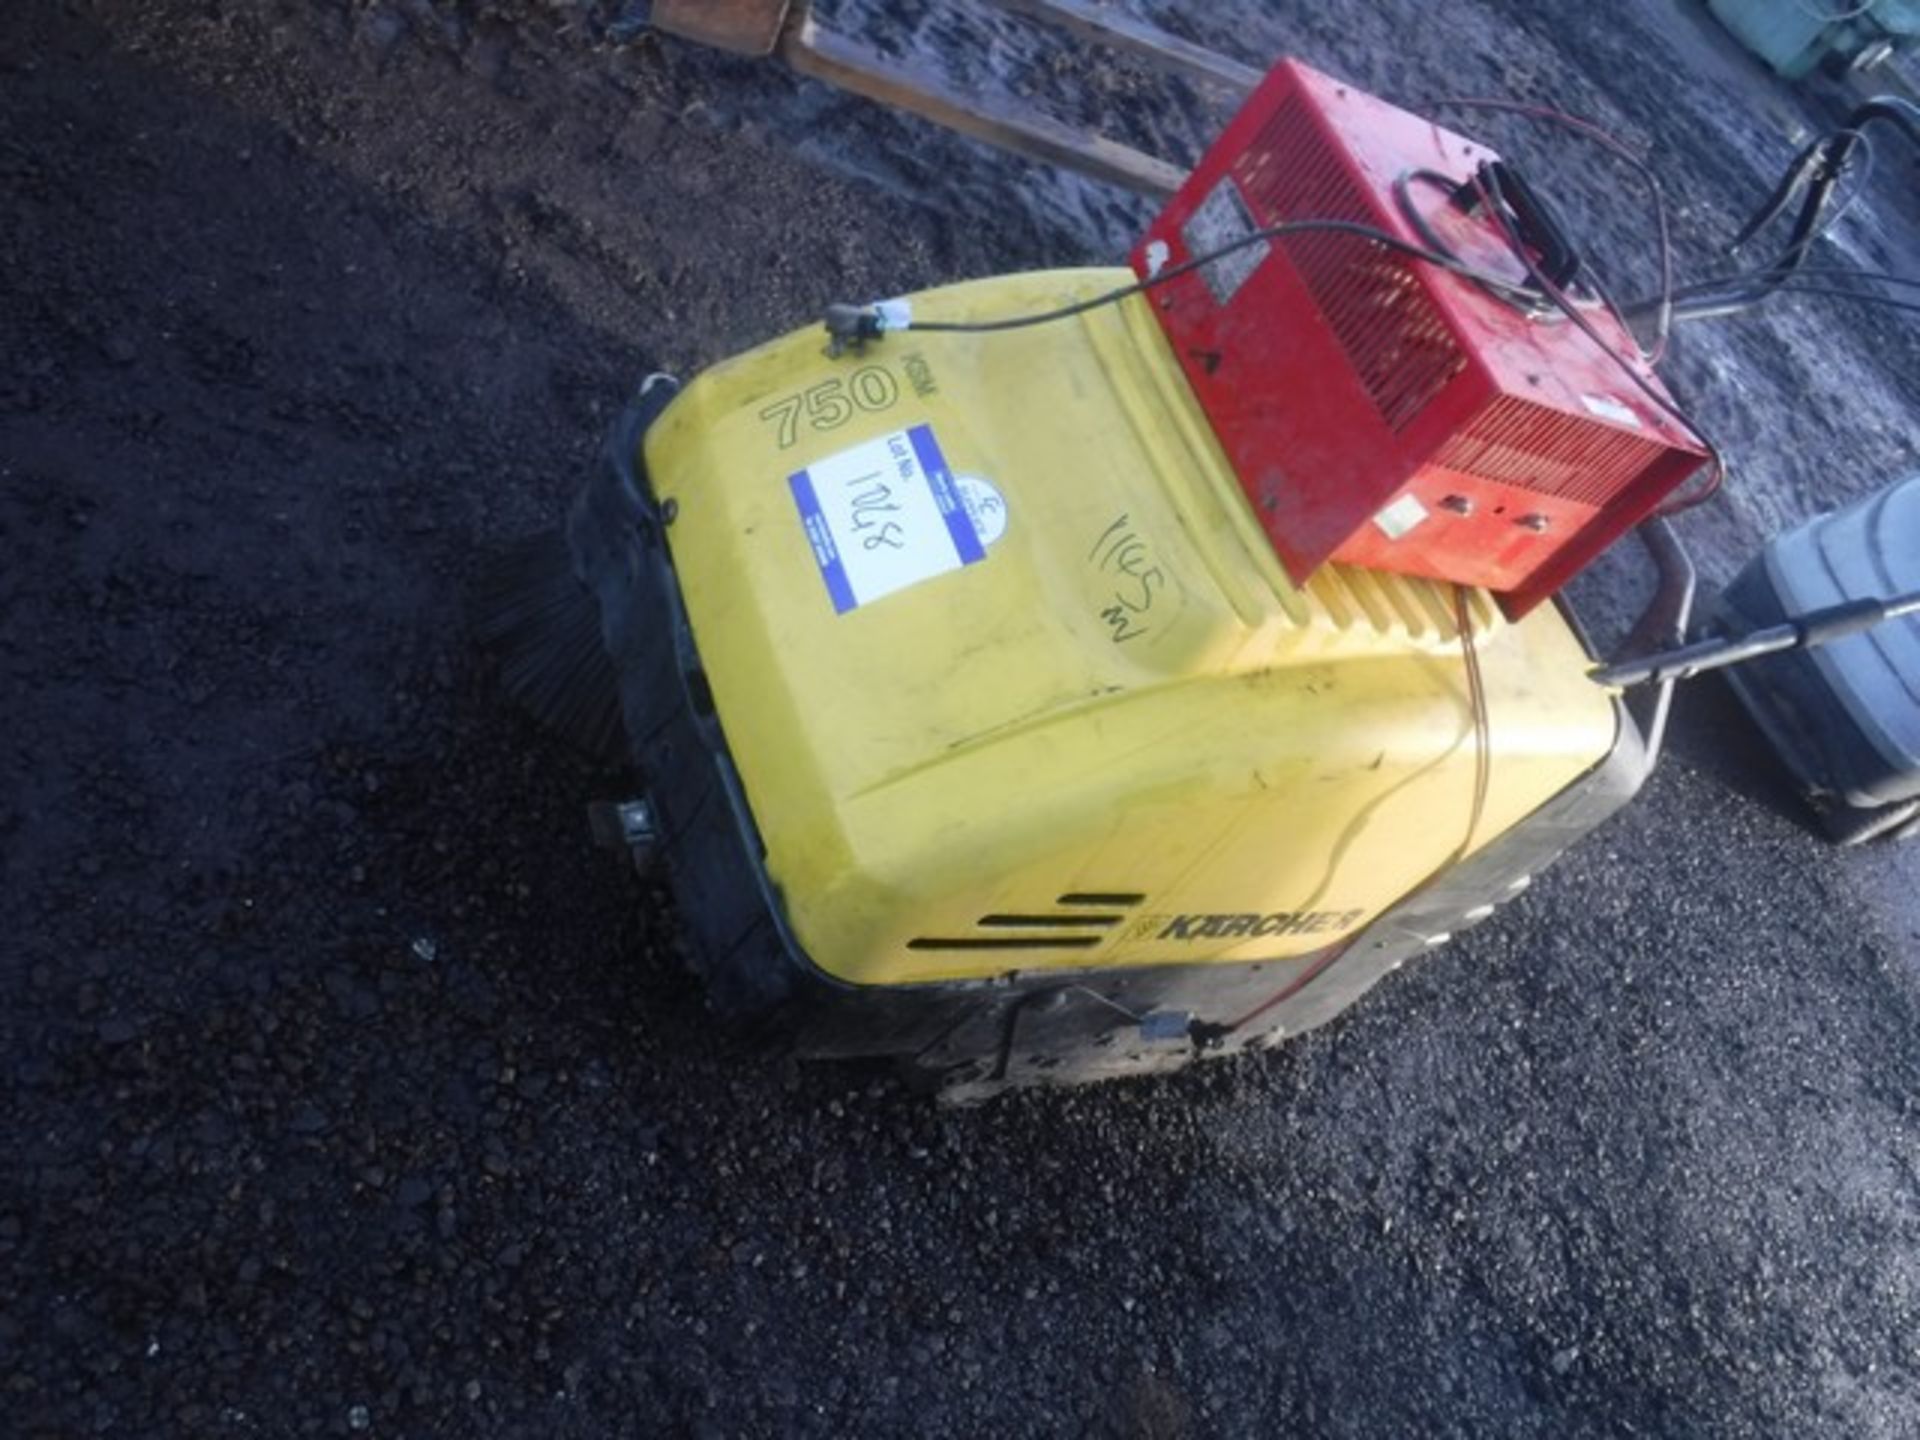 KARCHER ELECTRIC SWEEPER KSM750 C/W ROLLER, SIDE BRUSHES AND CHARGER